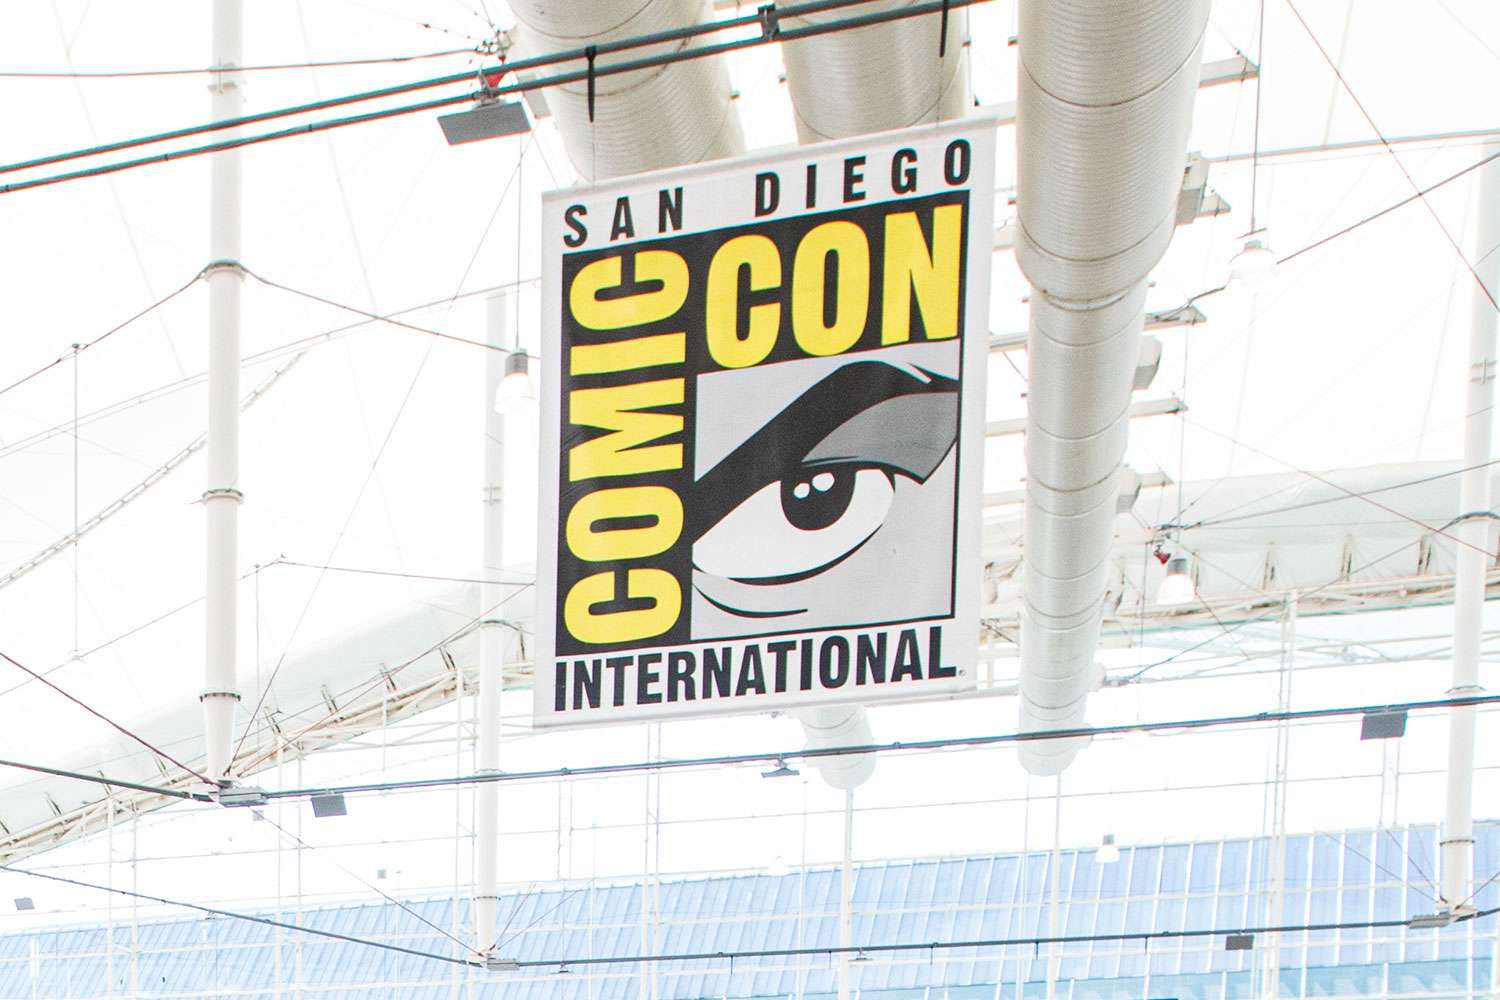 14 arrested, 10 victims recovered in alleged sex trafficking sting at San Diego Comic-Con